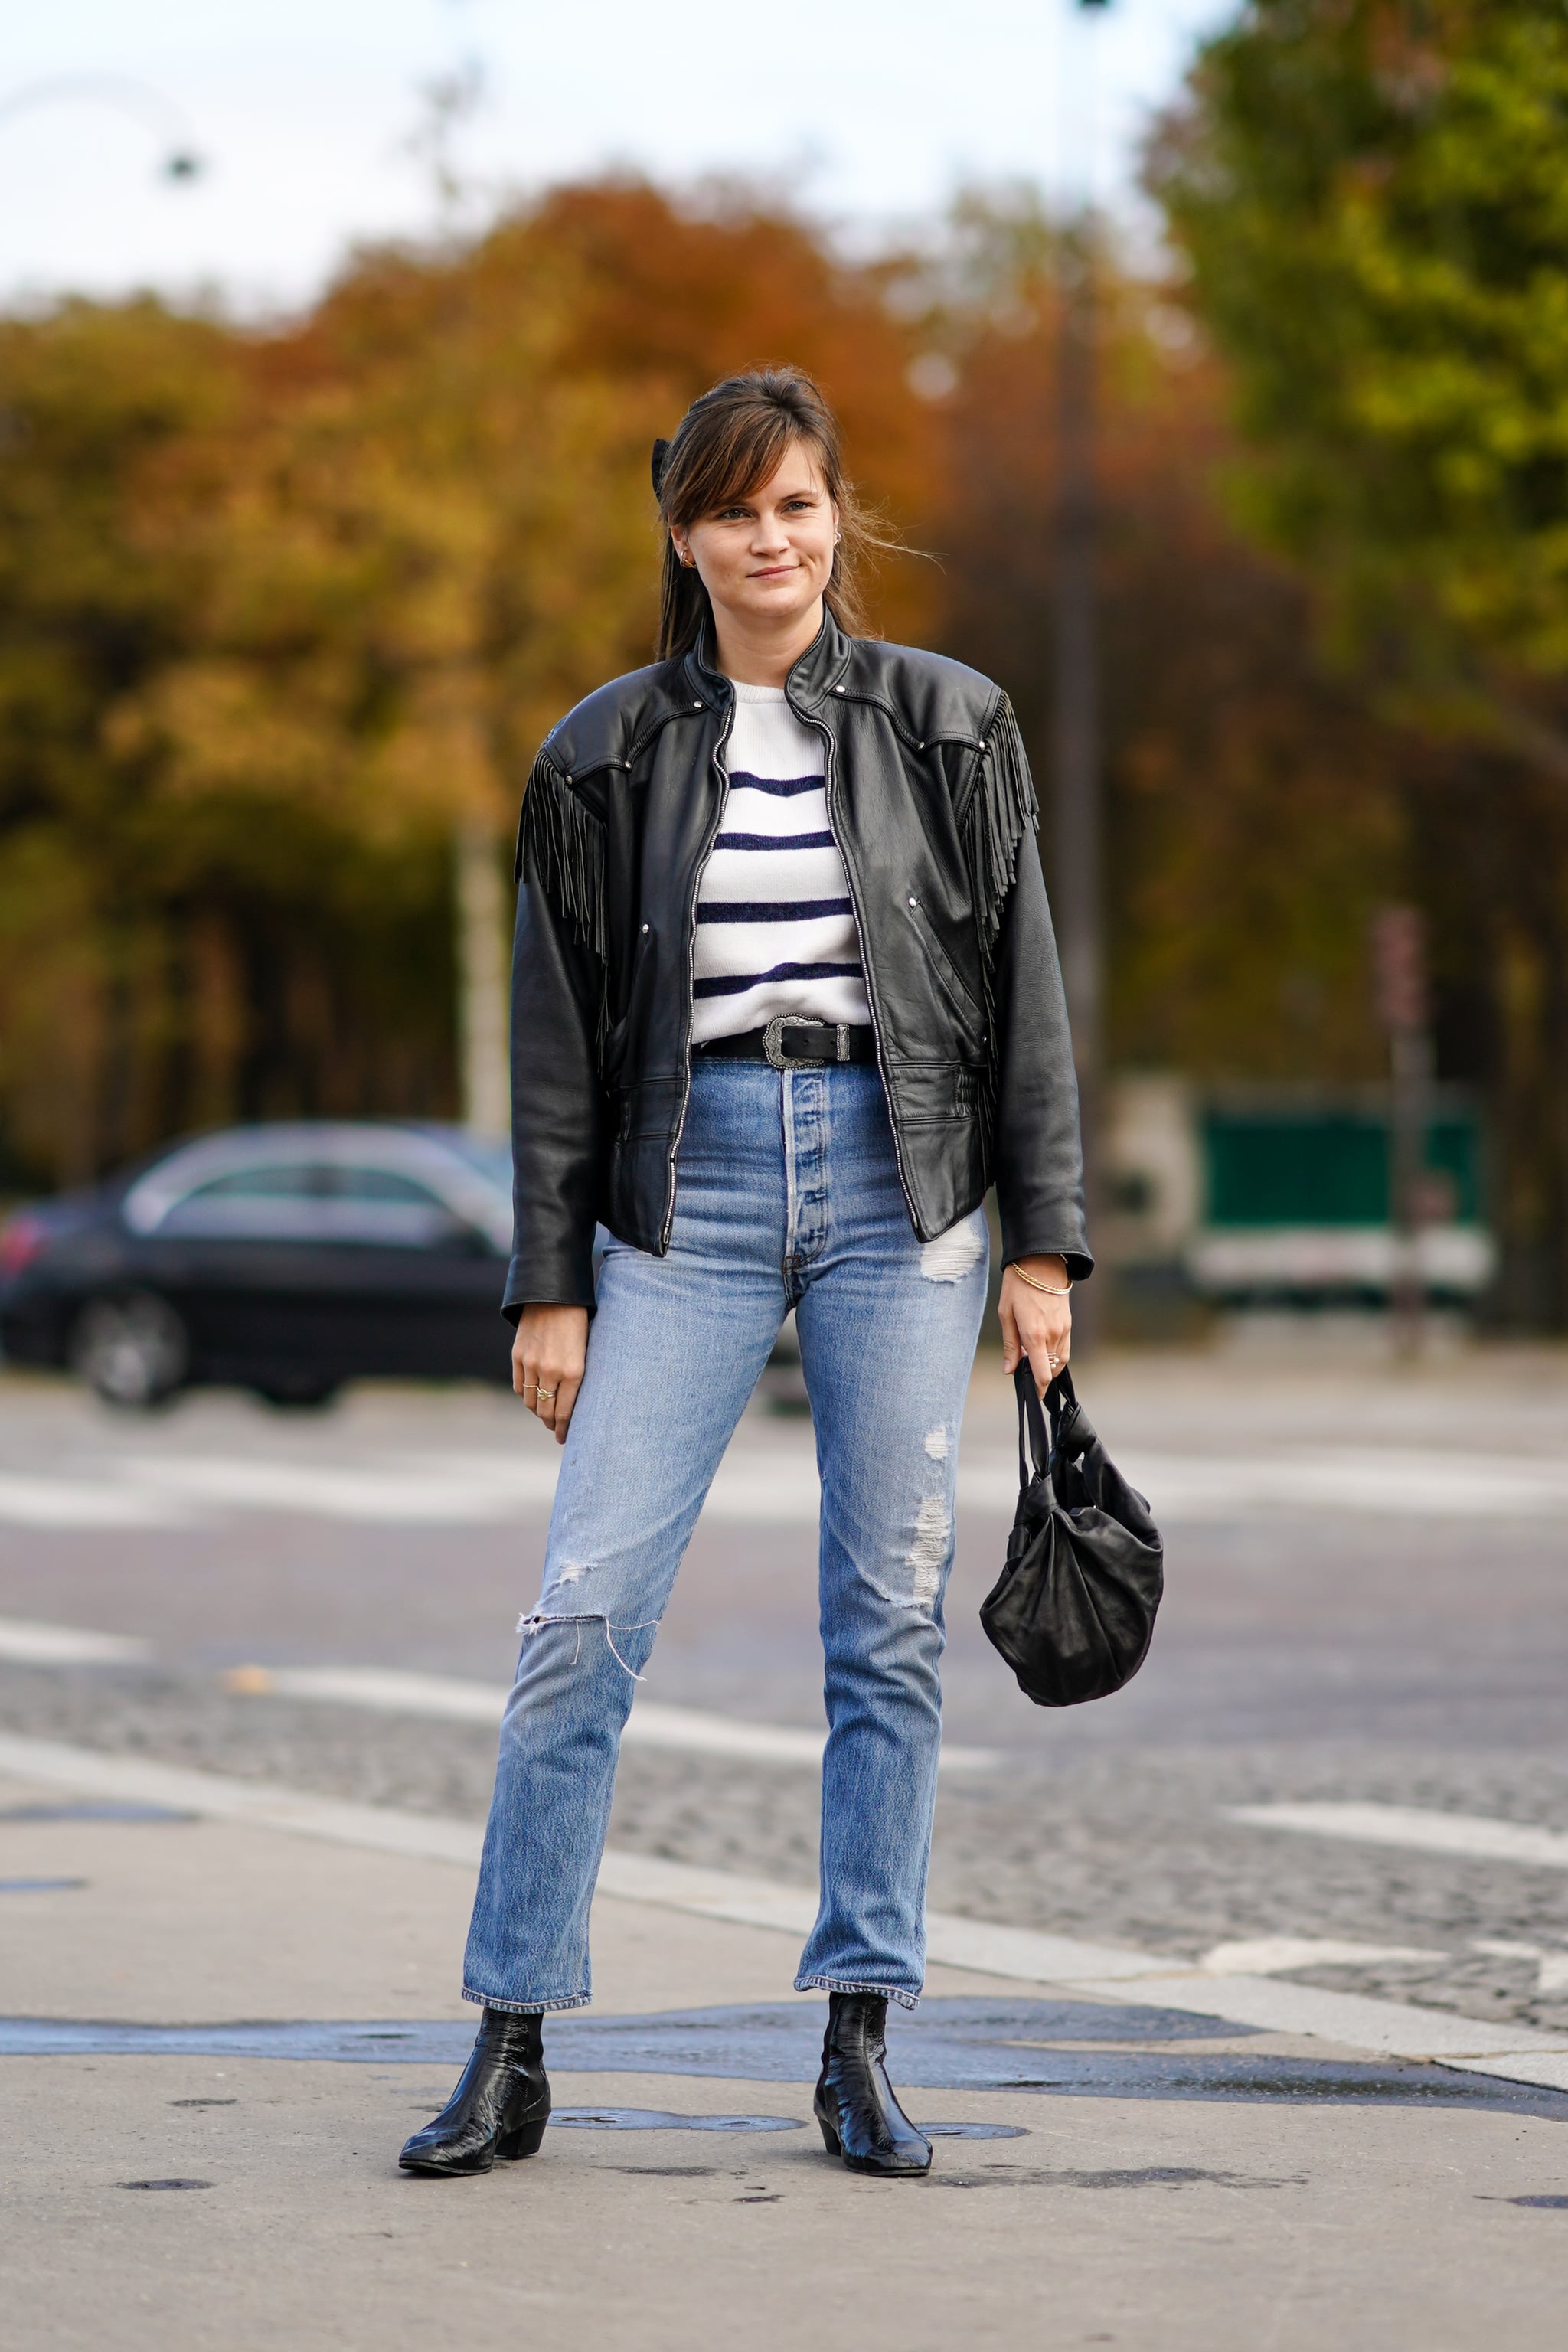 How To Wear Jeans With Ankle Boots | Popsugar Fashion